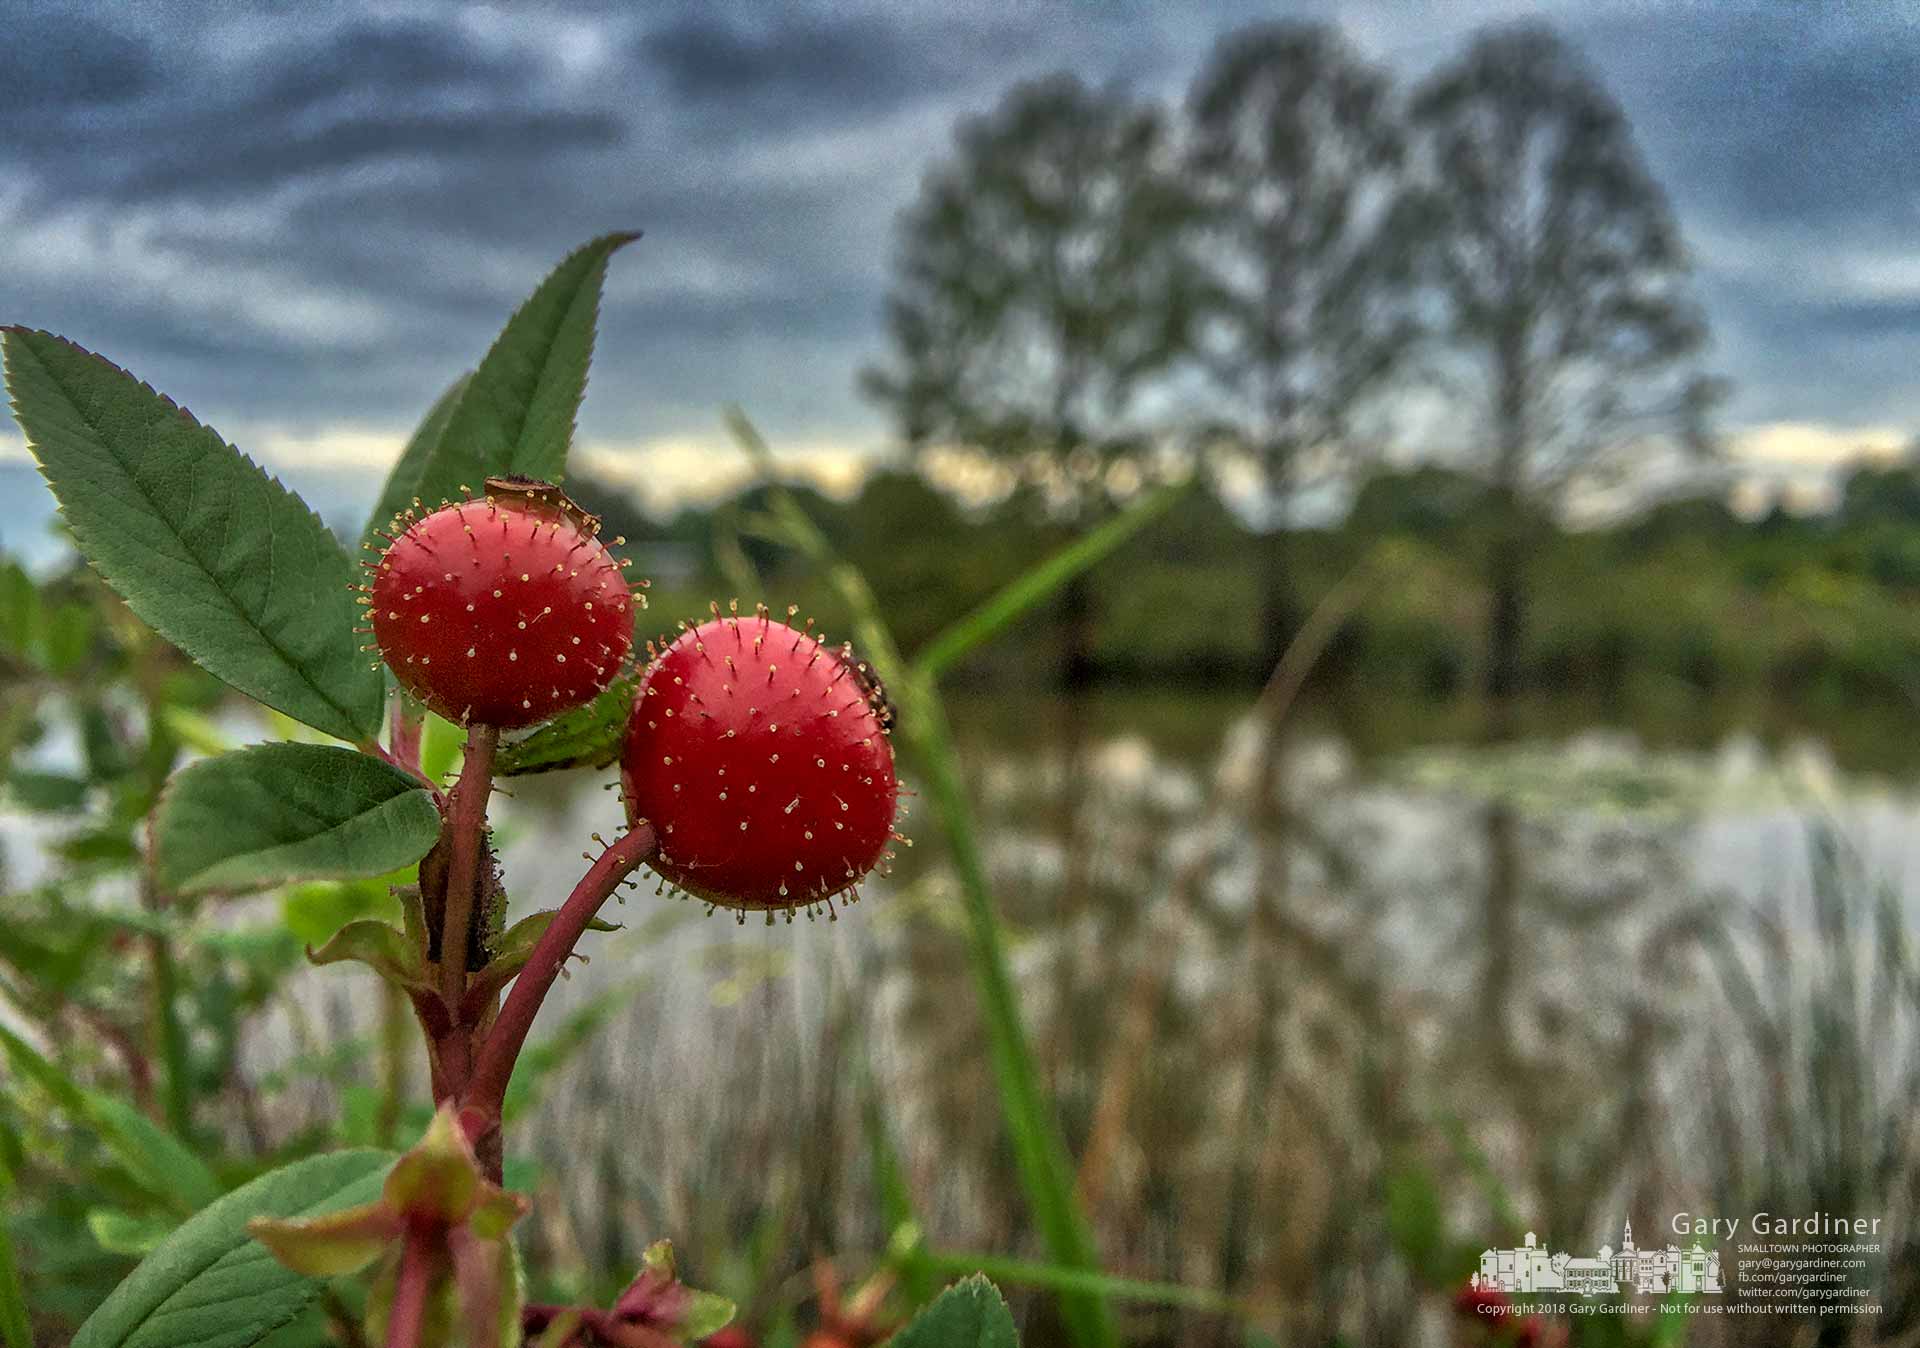 Rose hips from a swamp rose add bright color to a gray afternoon at the Highlands Park wetland. My Final Photo for Sept. 6, 2018.